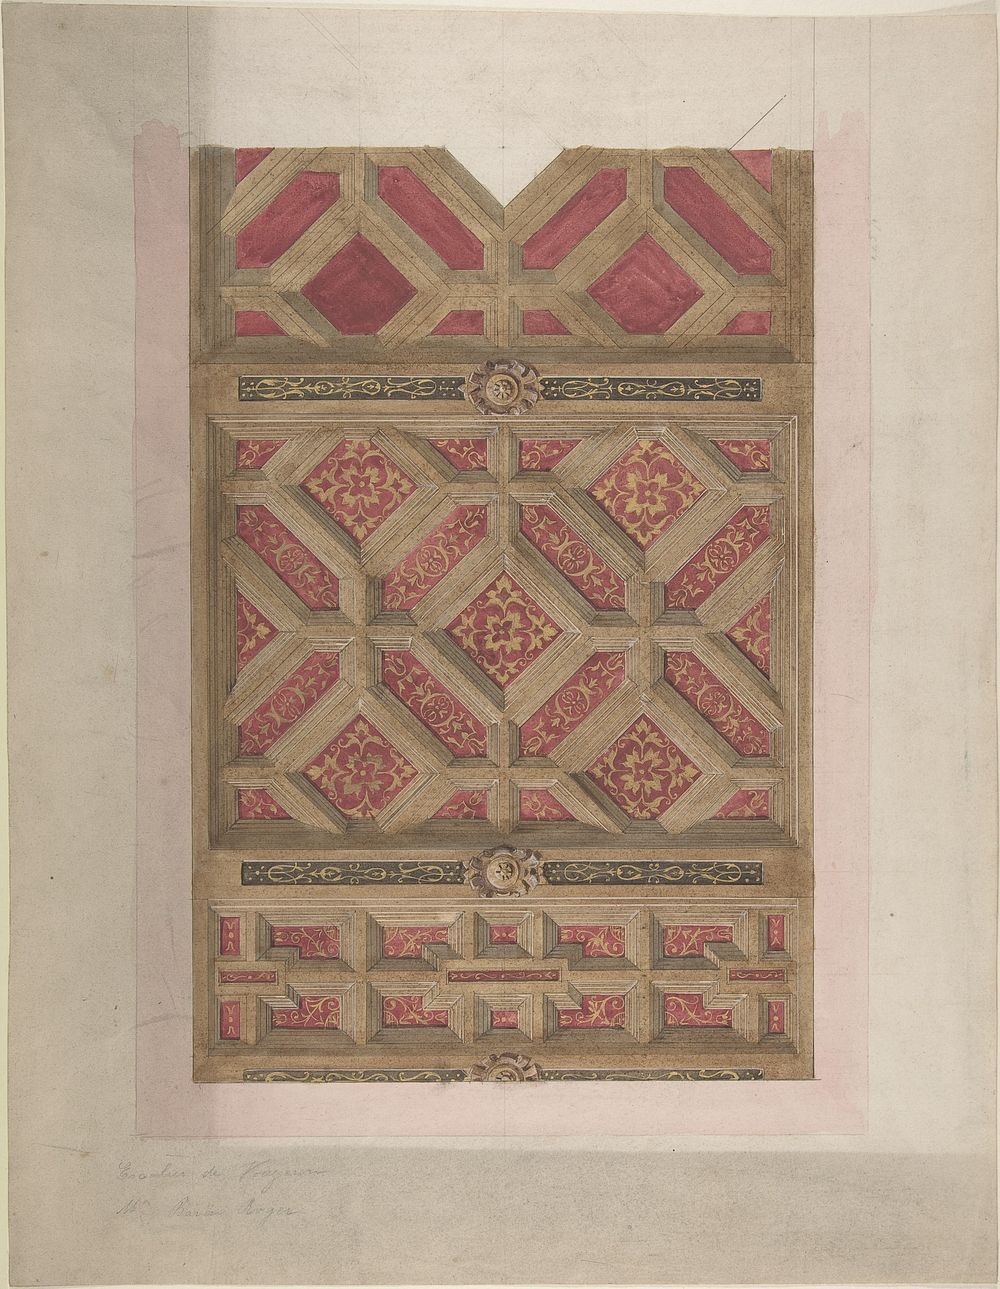 Design for Coffered Ceiling in Red and Gold by Jules Edmond Charles Lachaise and Eugène Pierre Gourdet